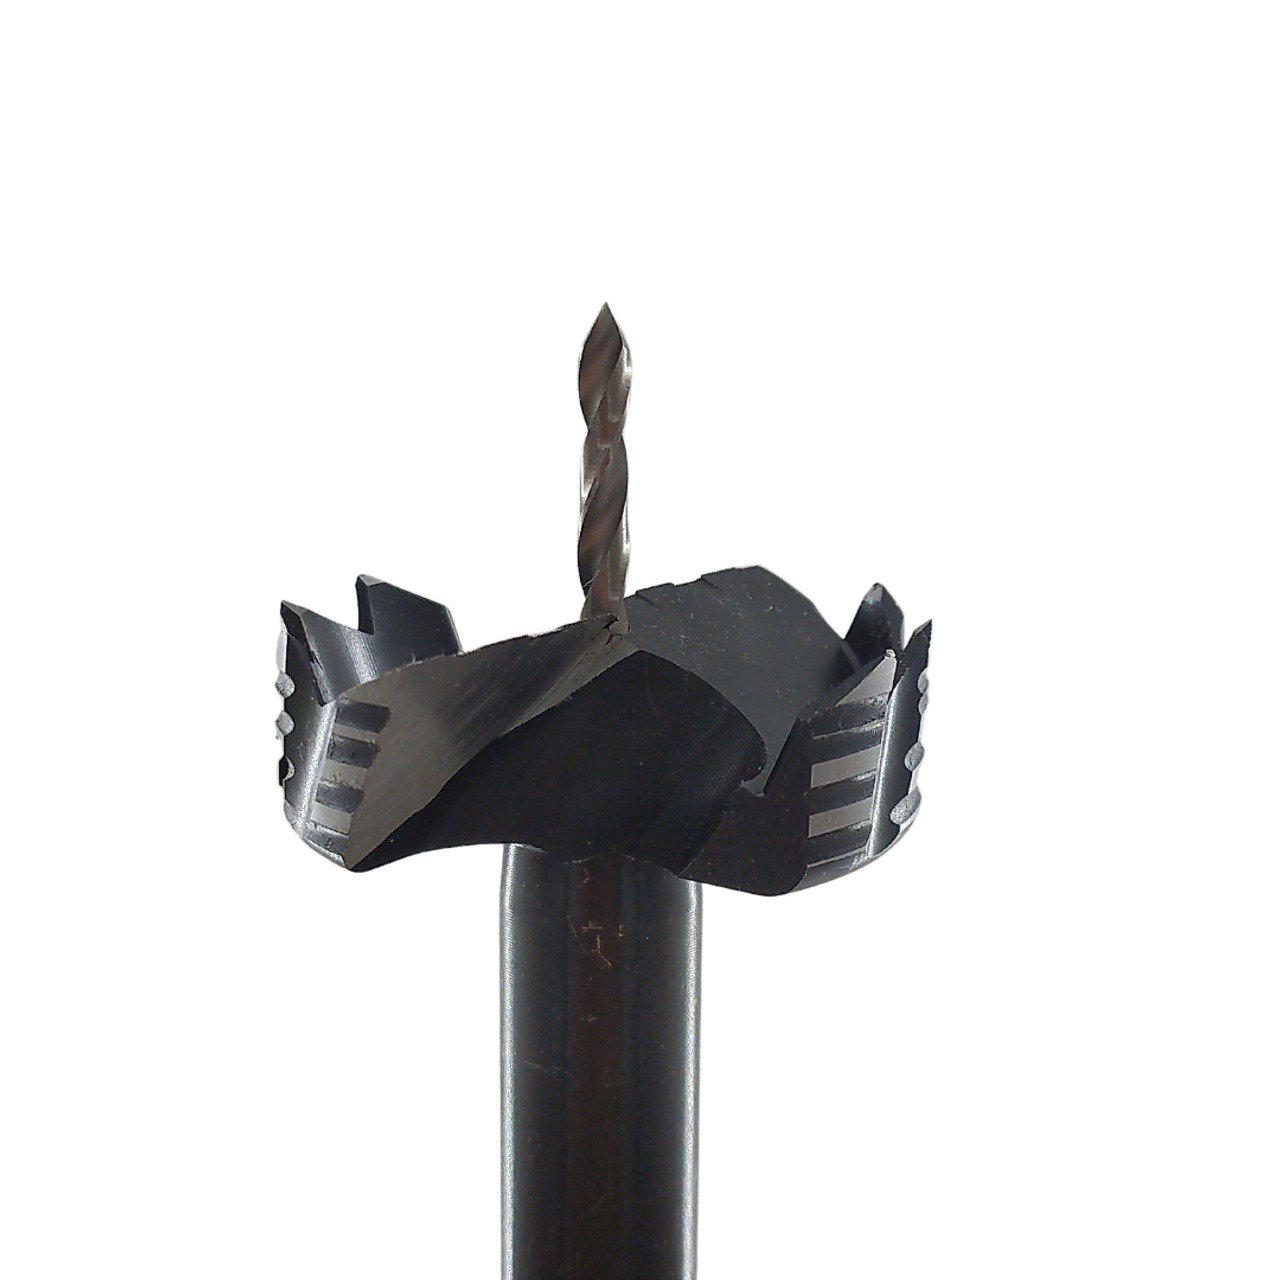 famag bormax prima forstner bit with centre drill bit for drilling on angles